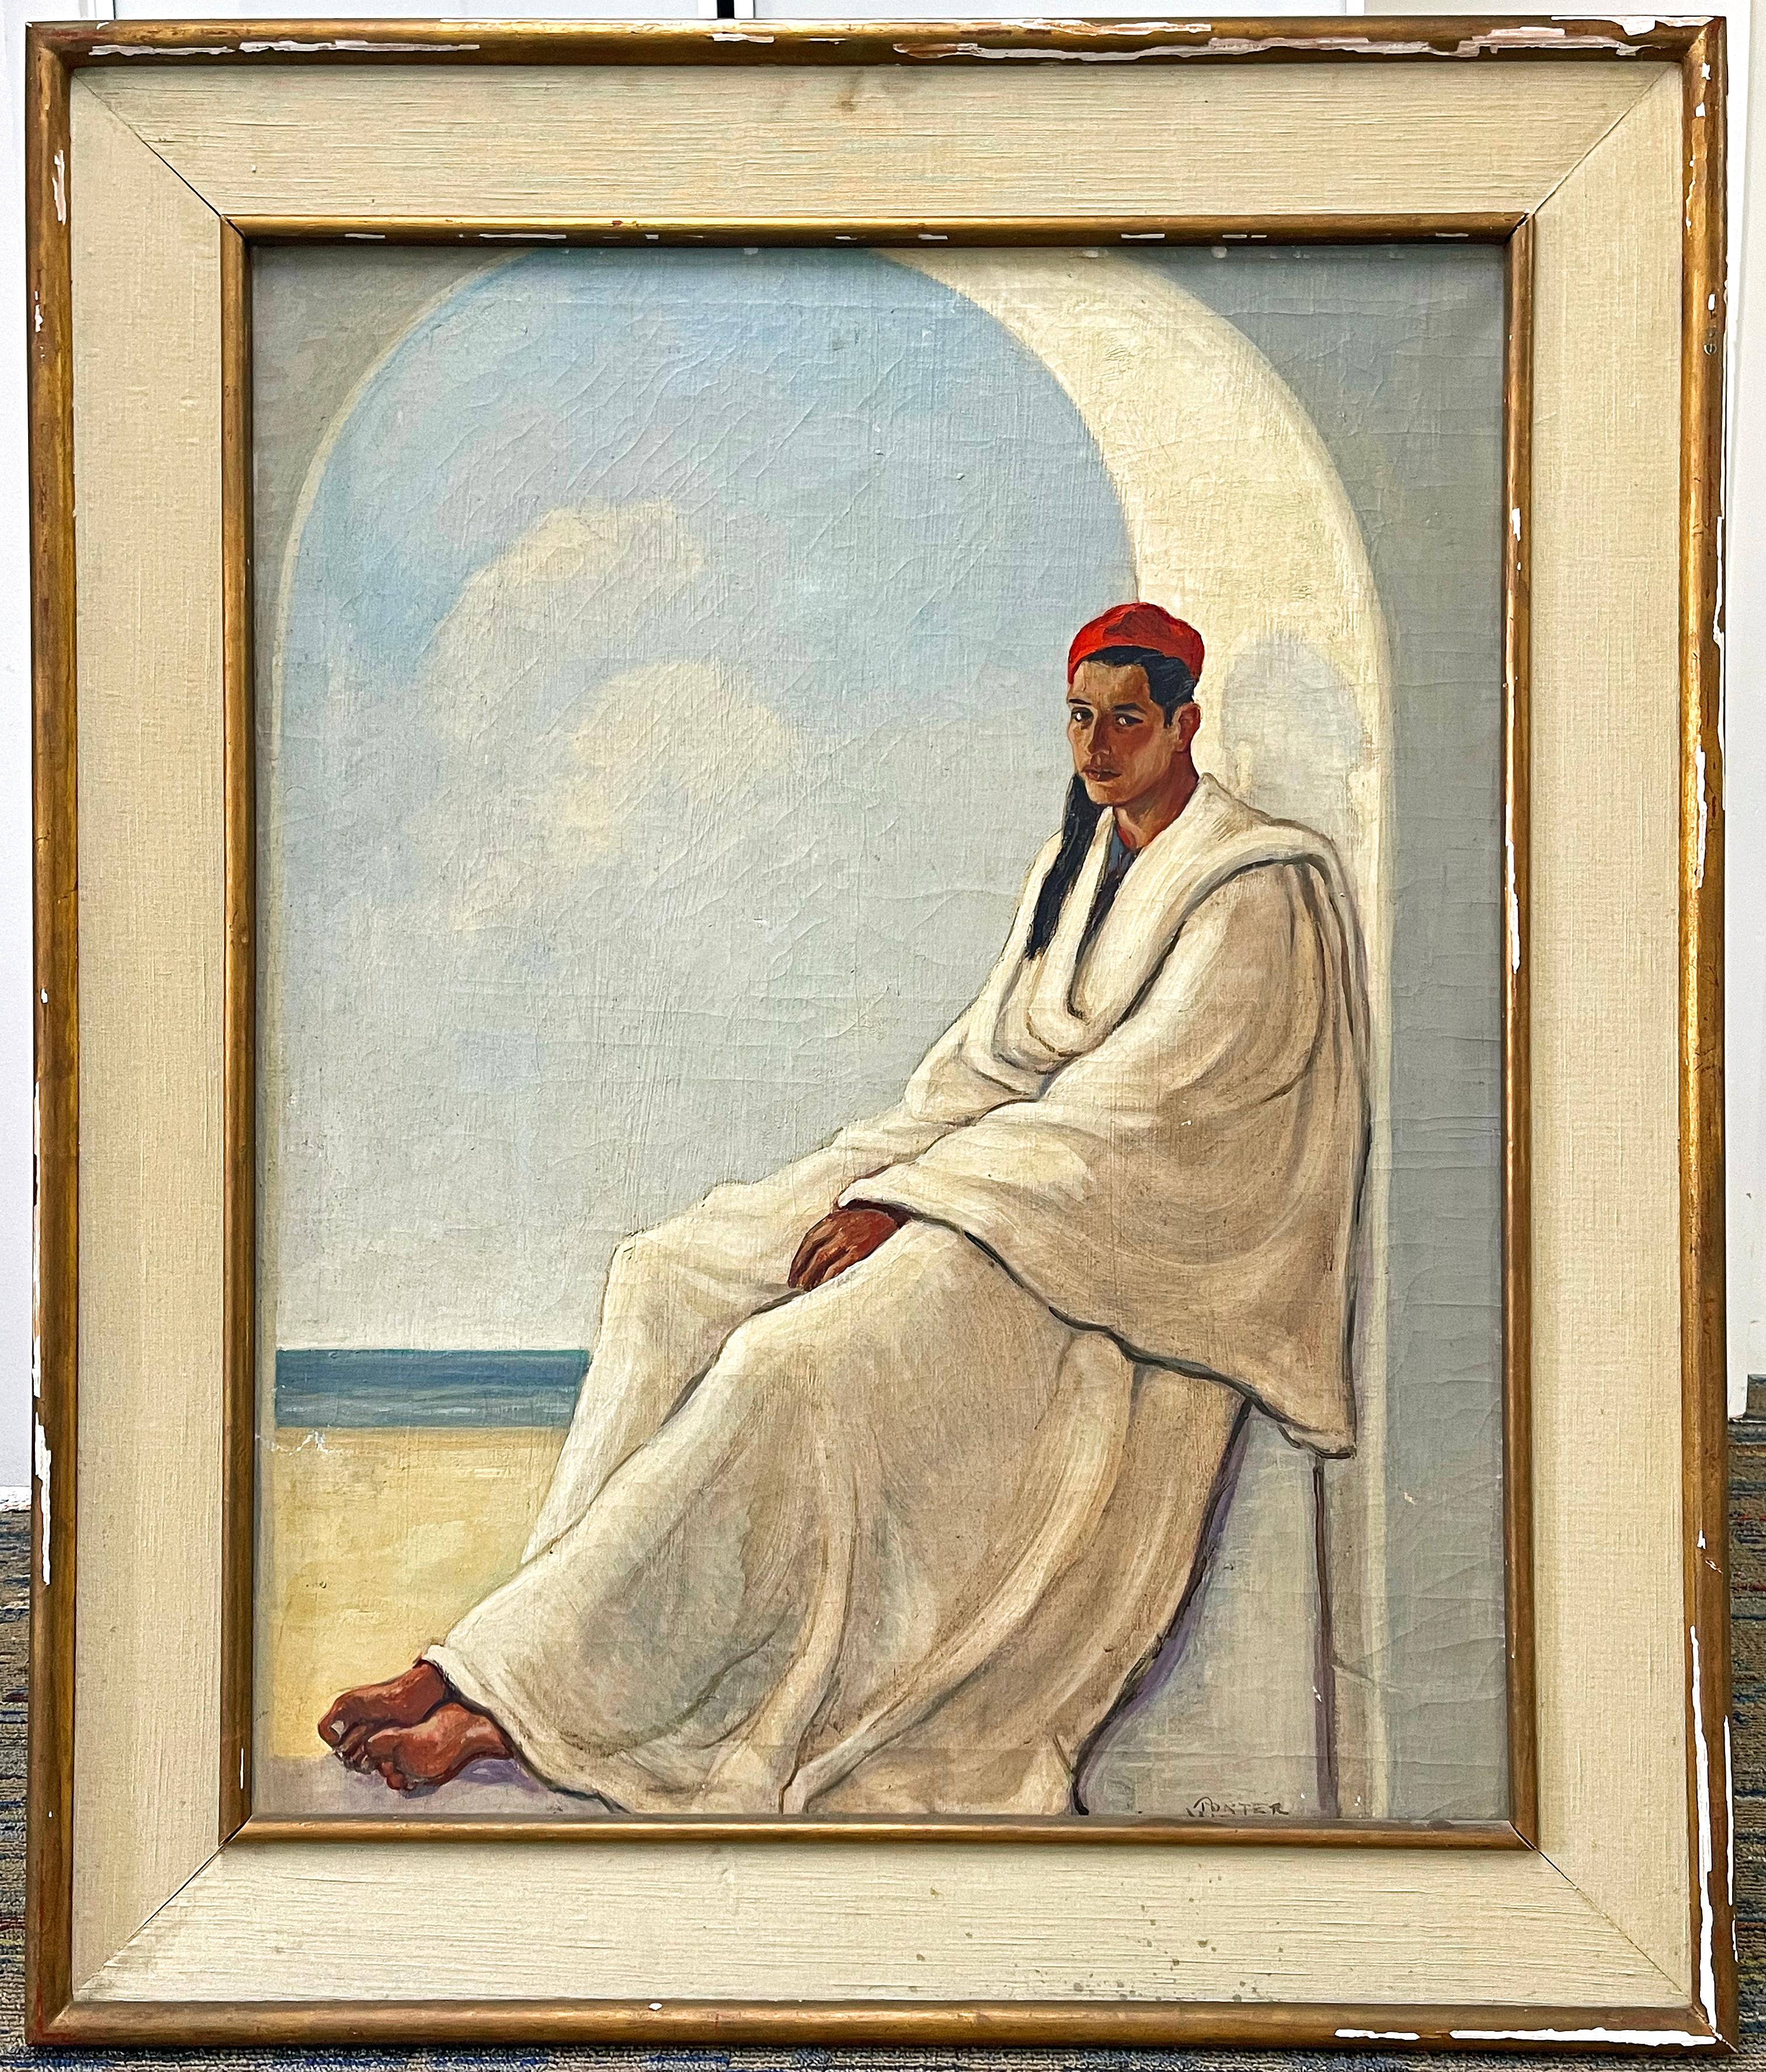 Powerful and striking, this painting of a Tunisian young man dressed in a white robe and traditional chechia hat, seated in an archway with the North African sky and Mediterranean Sea in the distance, was painted by Porter Woodruff in the 1930s. The